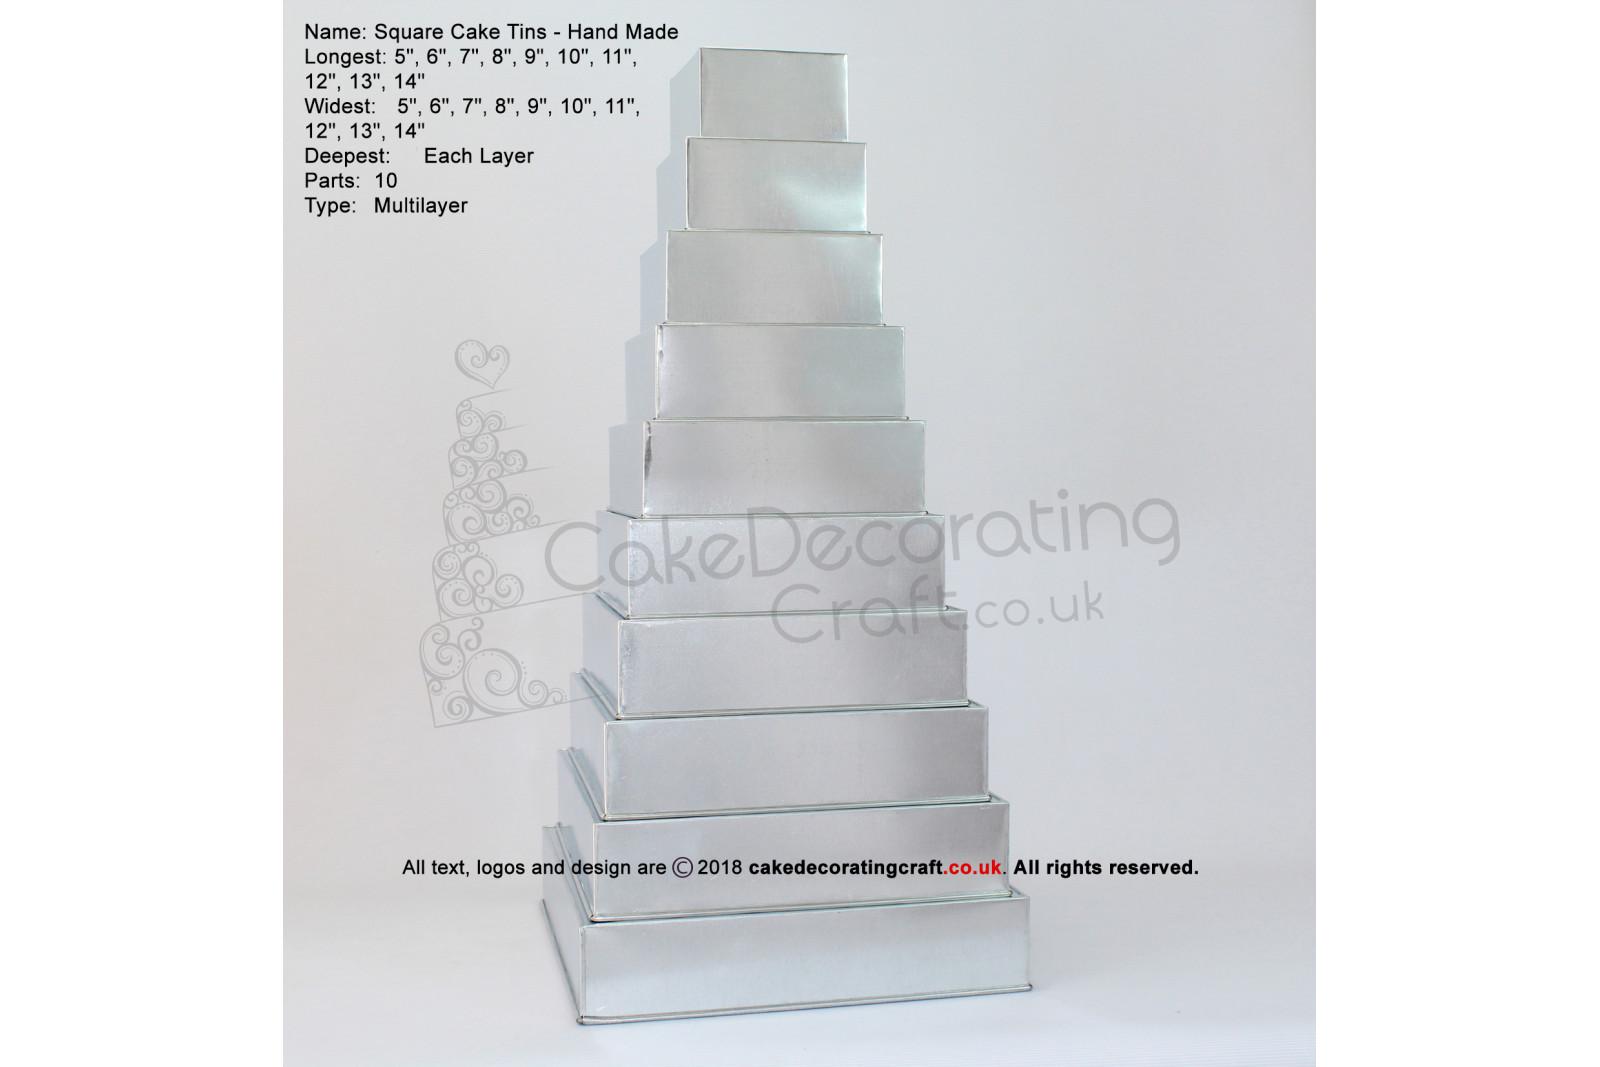 Square Cake Baking Tin | 4" Deep | Size 5 6 7 8 9 10 11 12 13 14 " | 10 Tiers | Hand Made